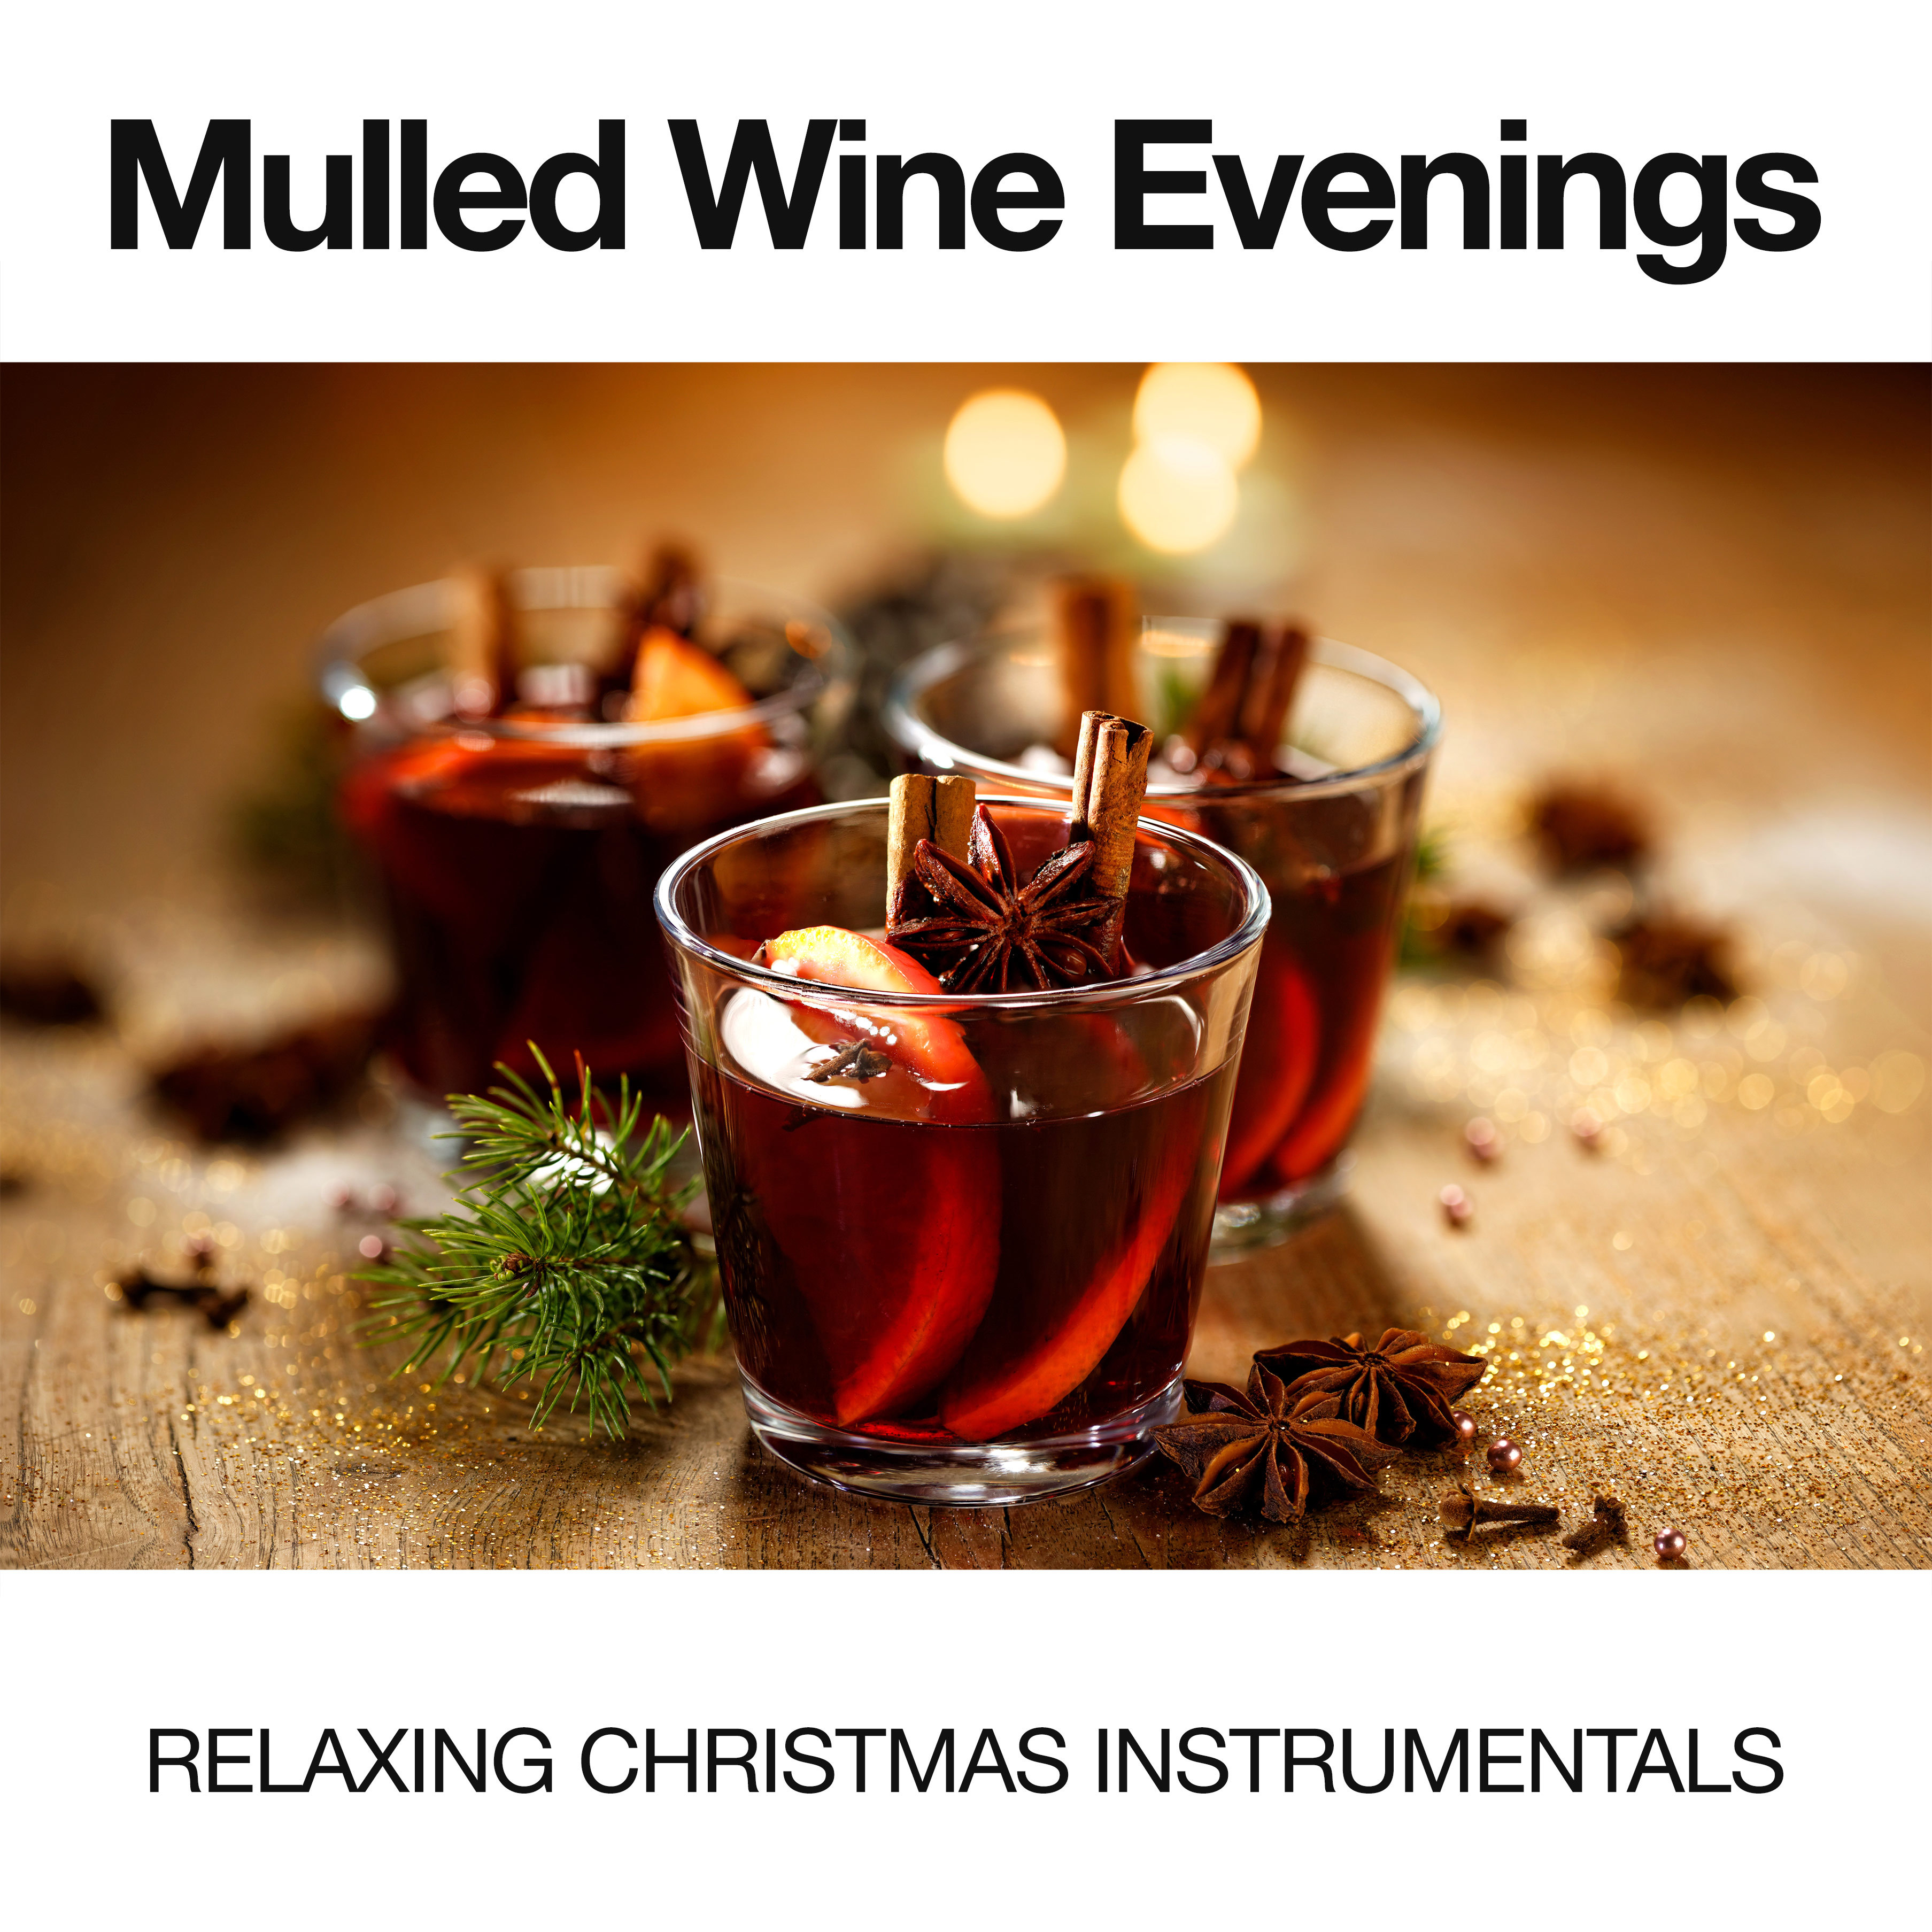 Mulled Wine Evenings: Relaxing Christmas Instrumentals